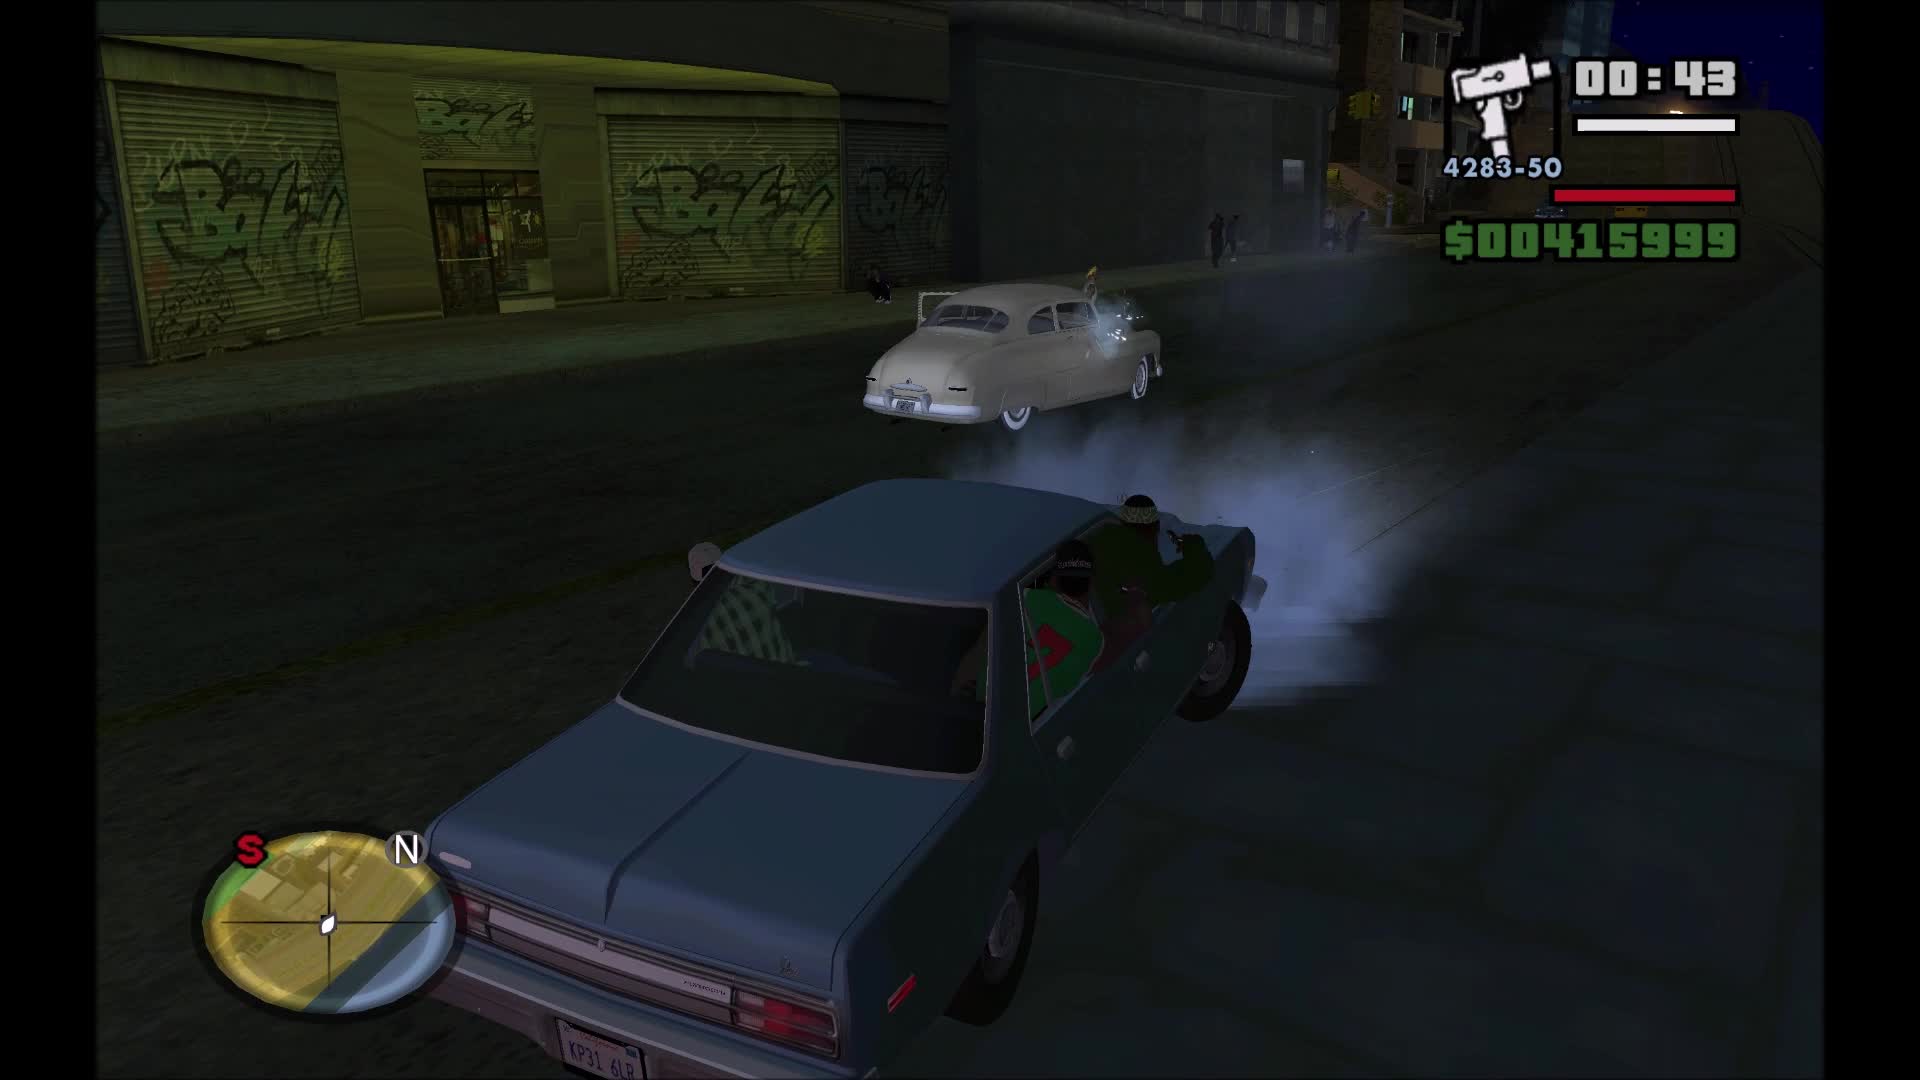 Drive by video - GTA San Andreas Remastered with Realistic car pack mod